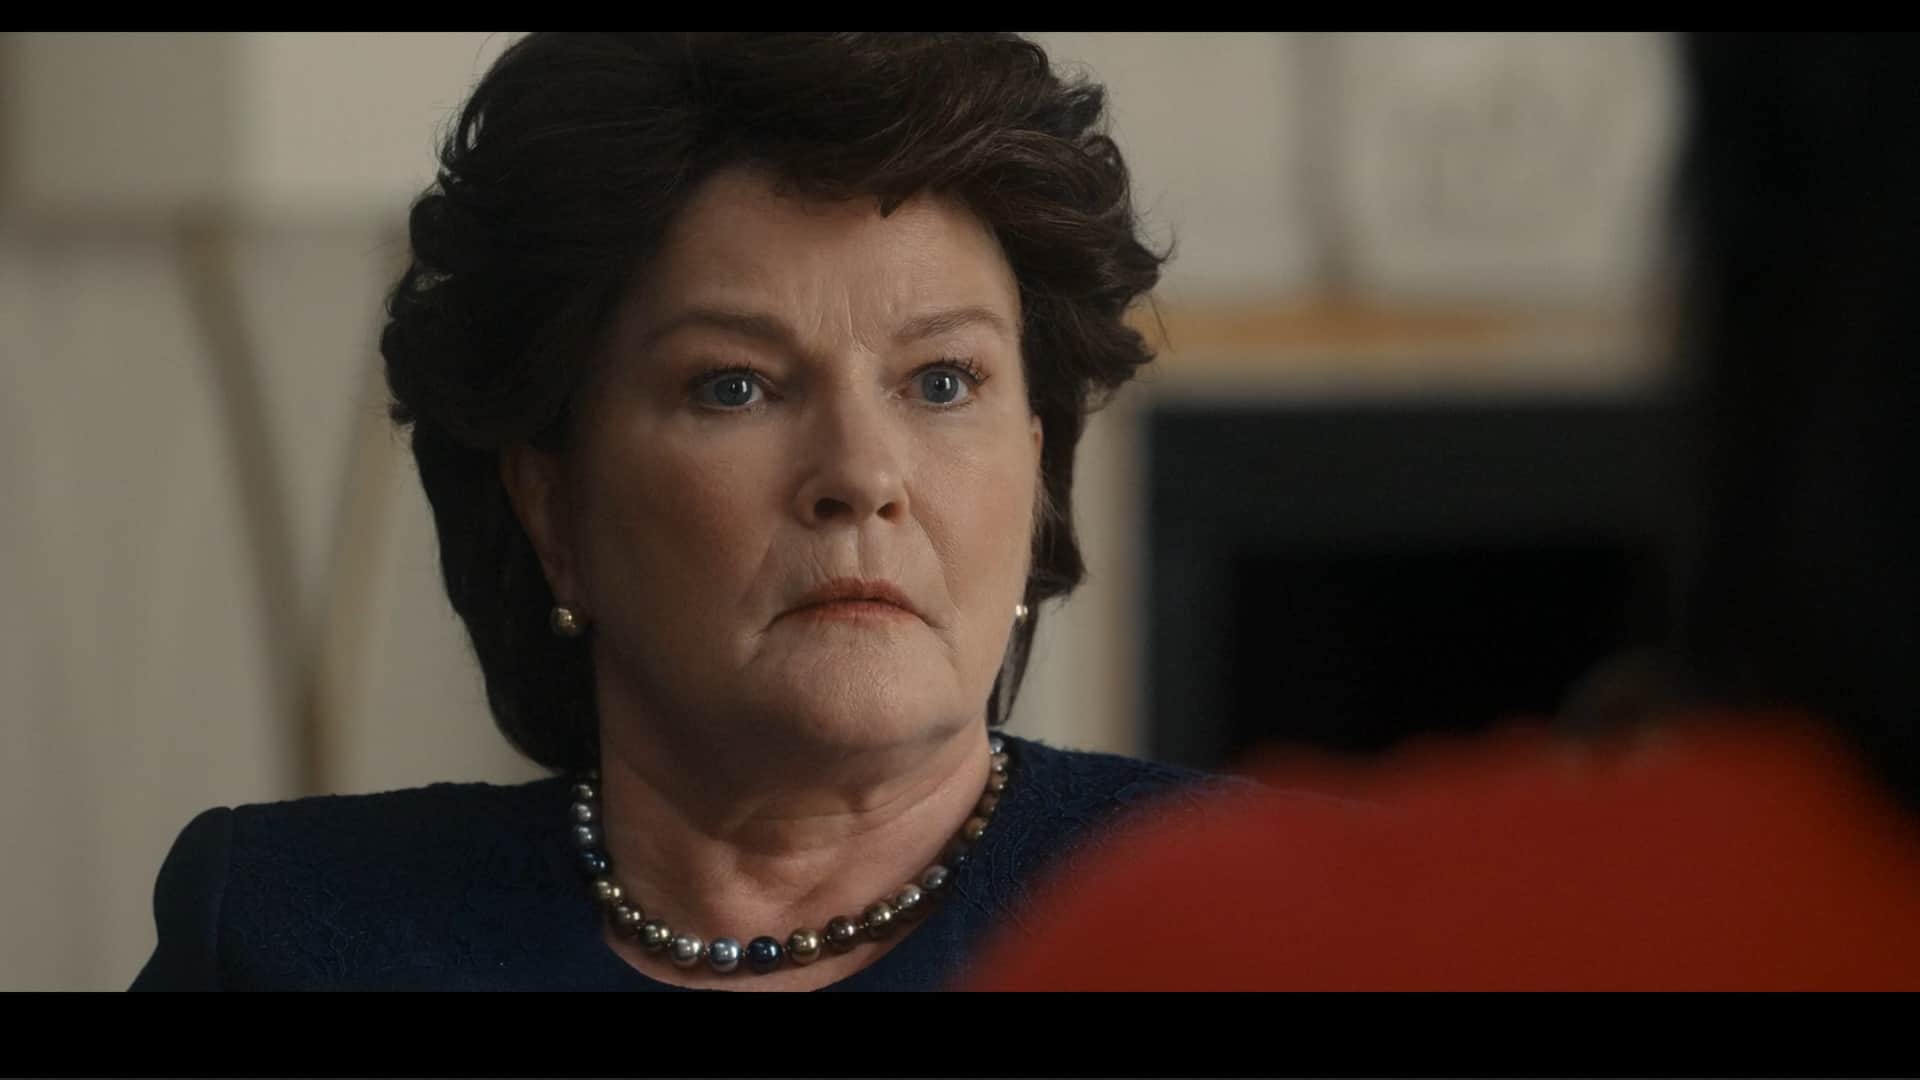 Susan (Kate Mulgrew) shocked by Michelle's job offer